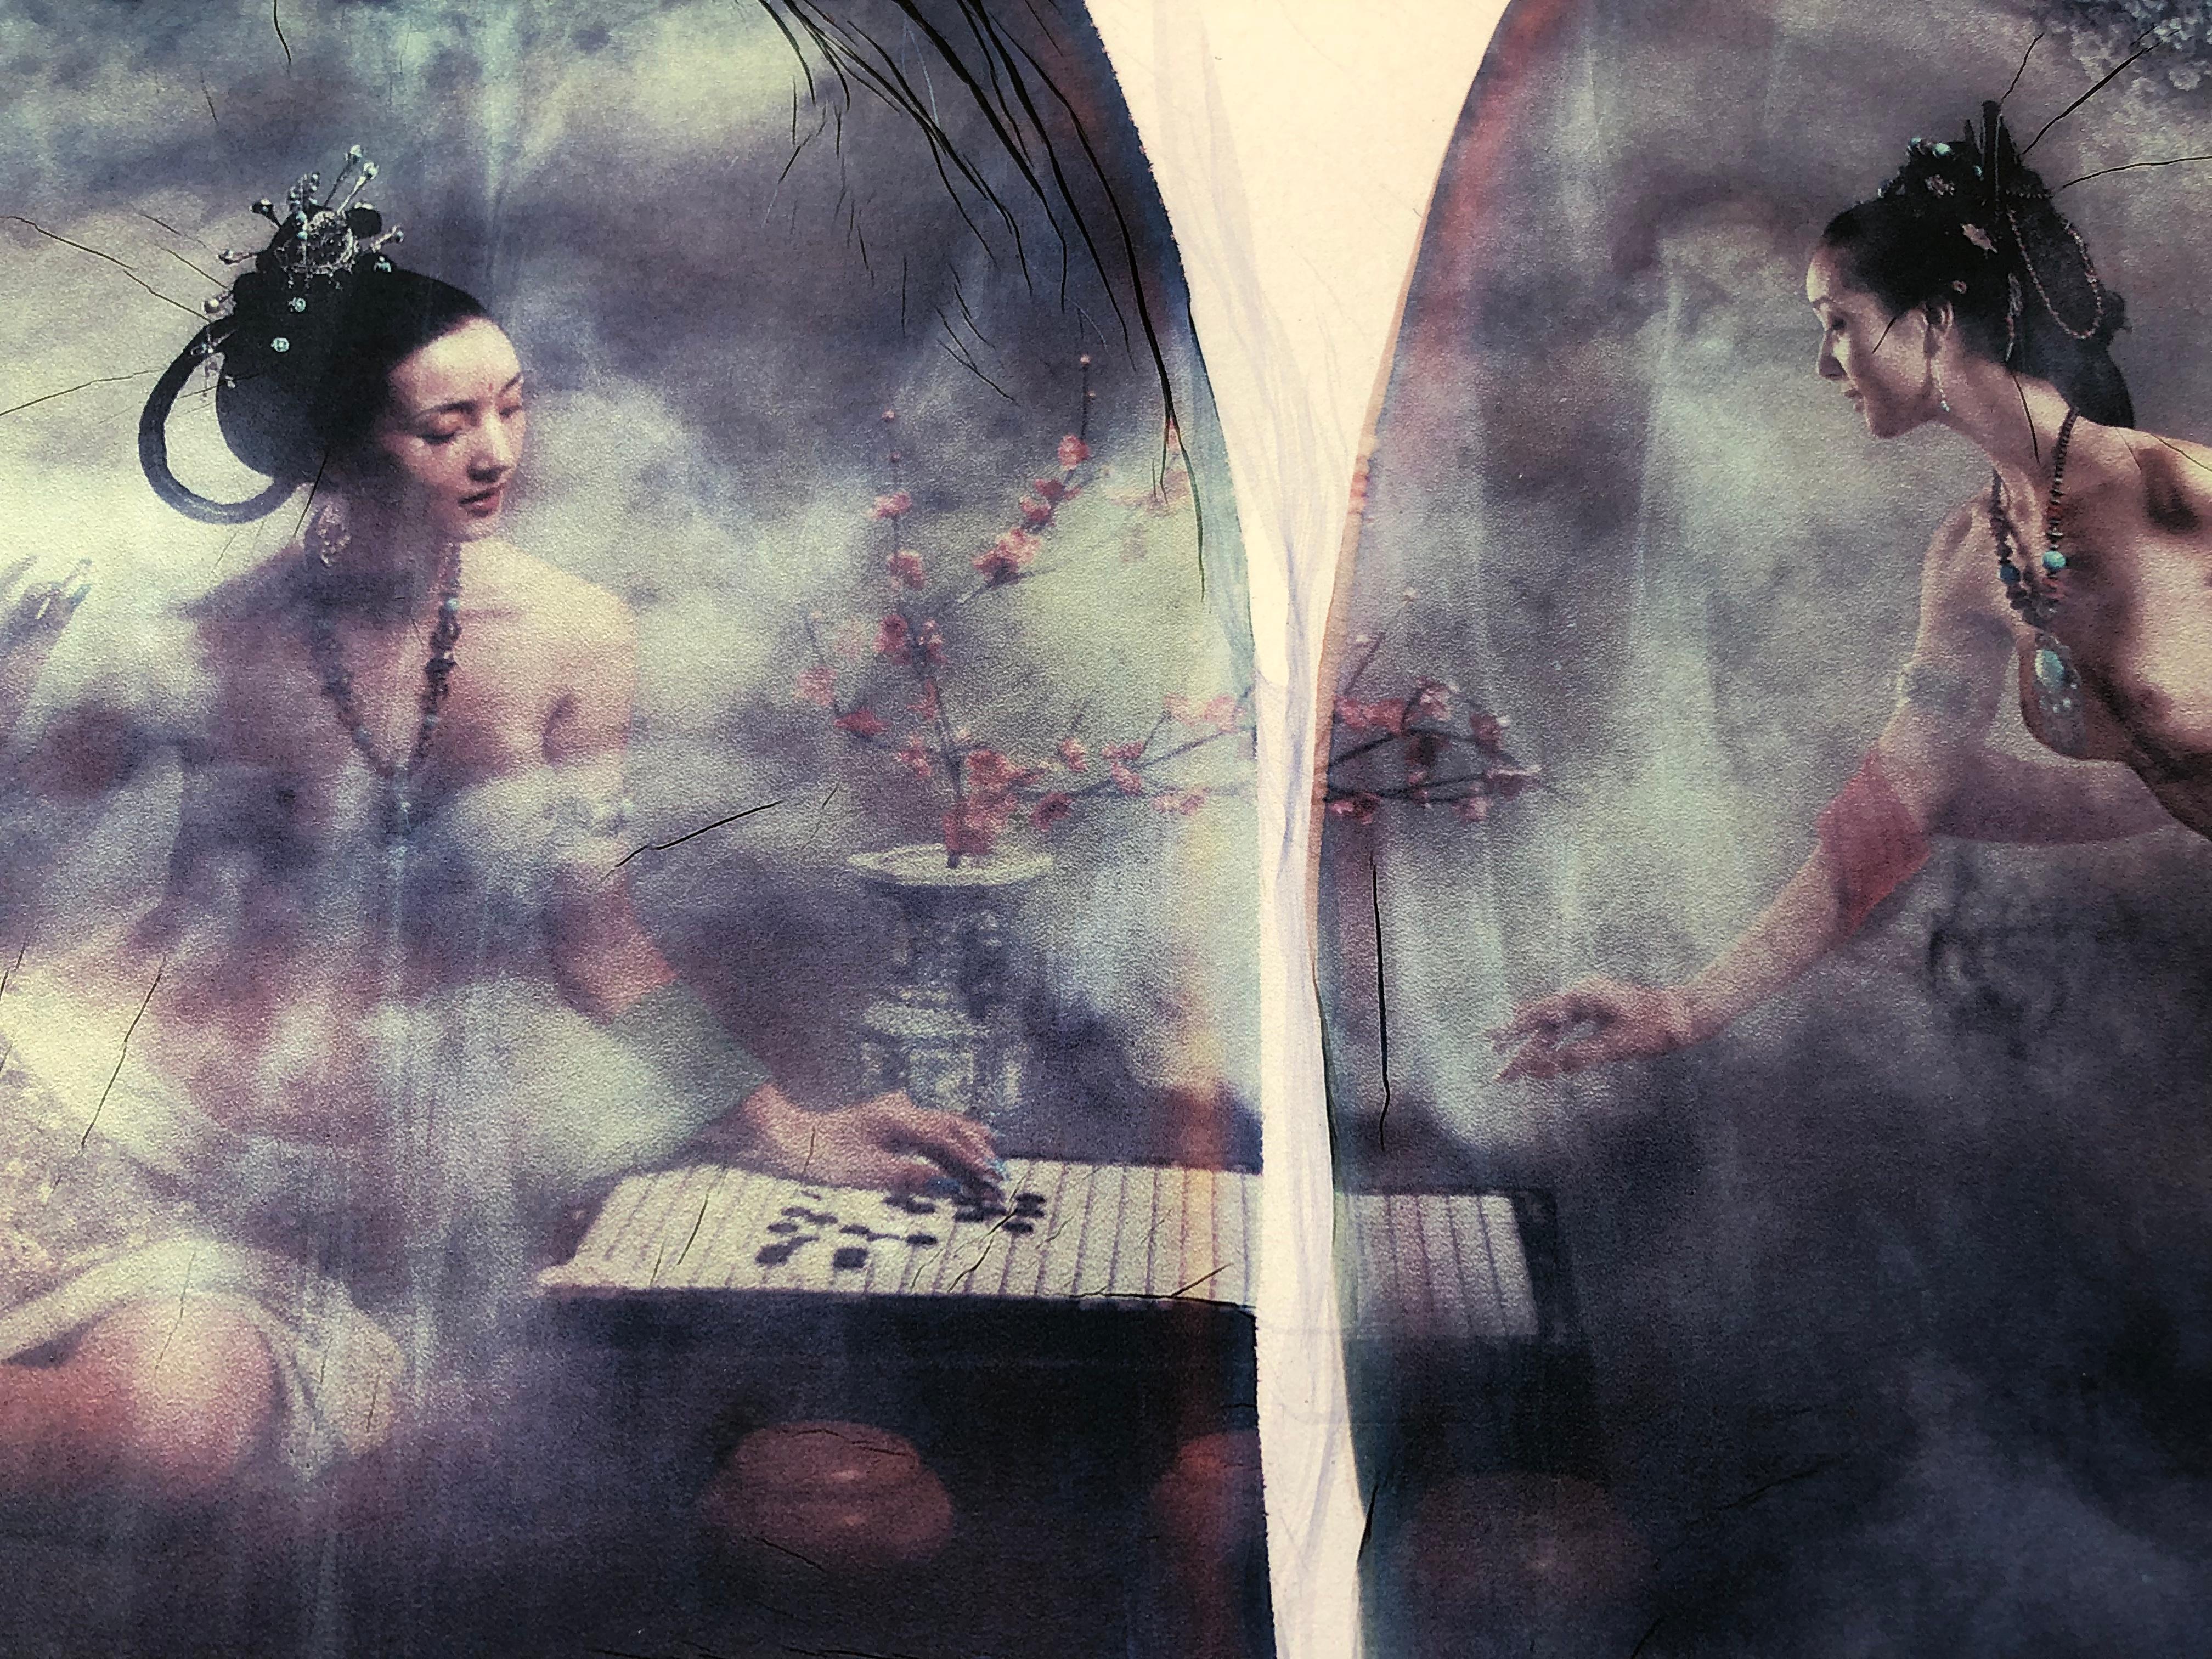 'Untitled' (Chinese Classical), 2002, Edition 2/50 plus 2 Artist Proofs, Archival Pigment Print based on a POLAROID 809 Emulsion Transfer, 16.5x23.5inches, mounted on Aluminum, Signed, embossed stamp and artist certificate. 

exhibitions:
Instant